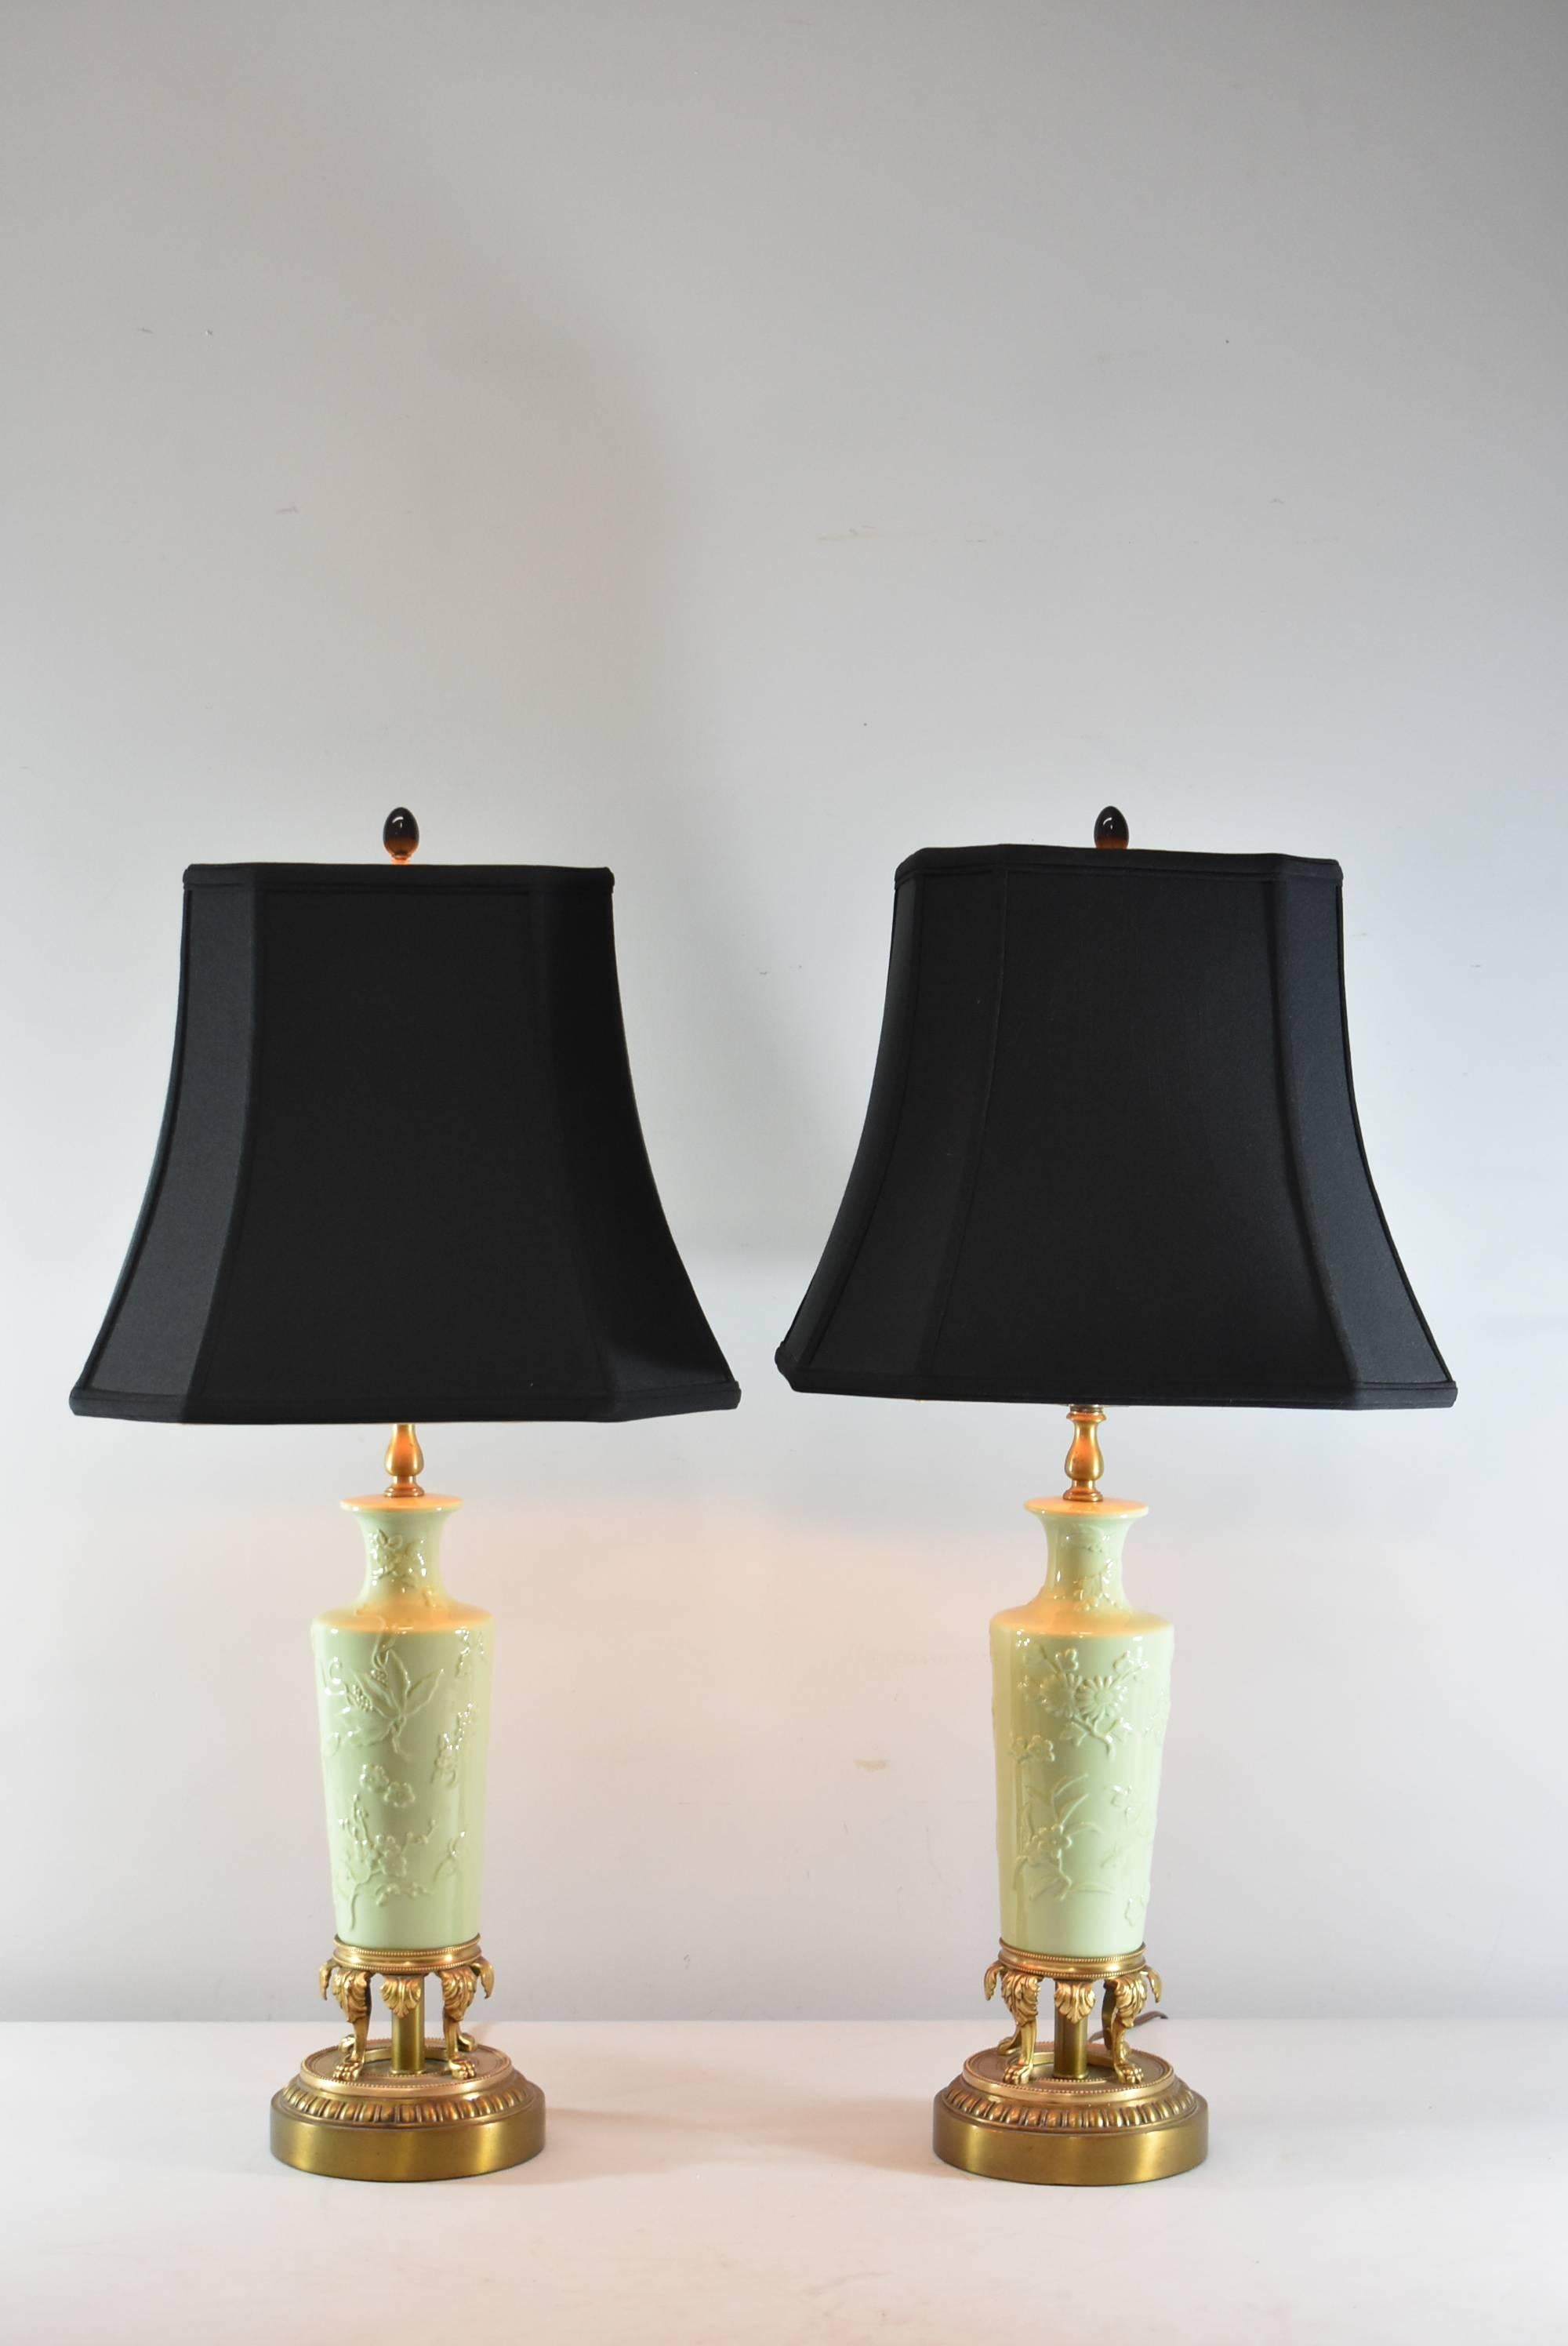 A stunning pair of porcelain table lamps, circa 1930s. They feature a beautiful celadon body with floral details that rests upon a brass base with four claw foot legs. The shades are not included.